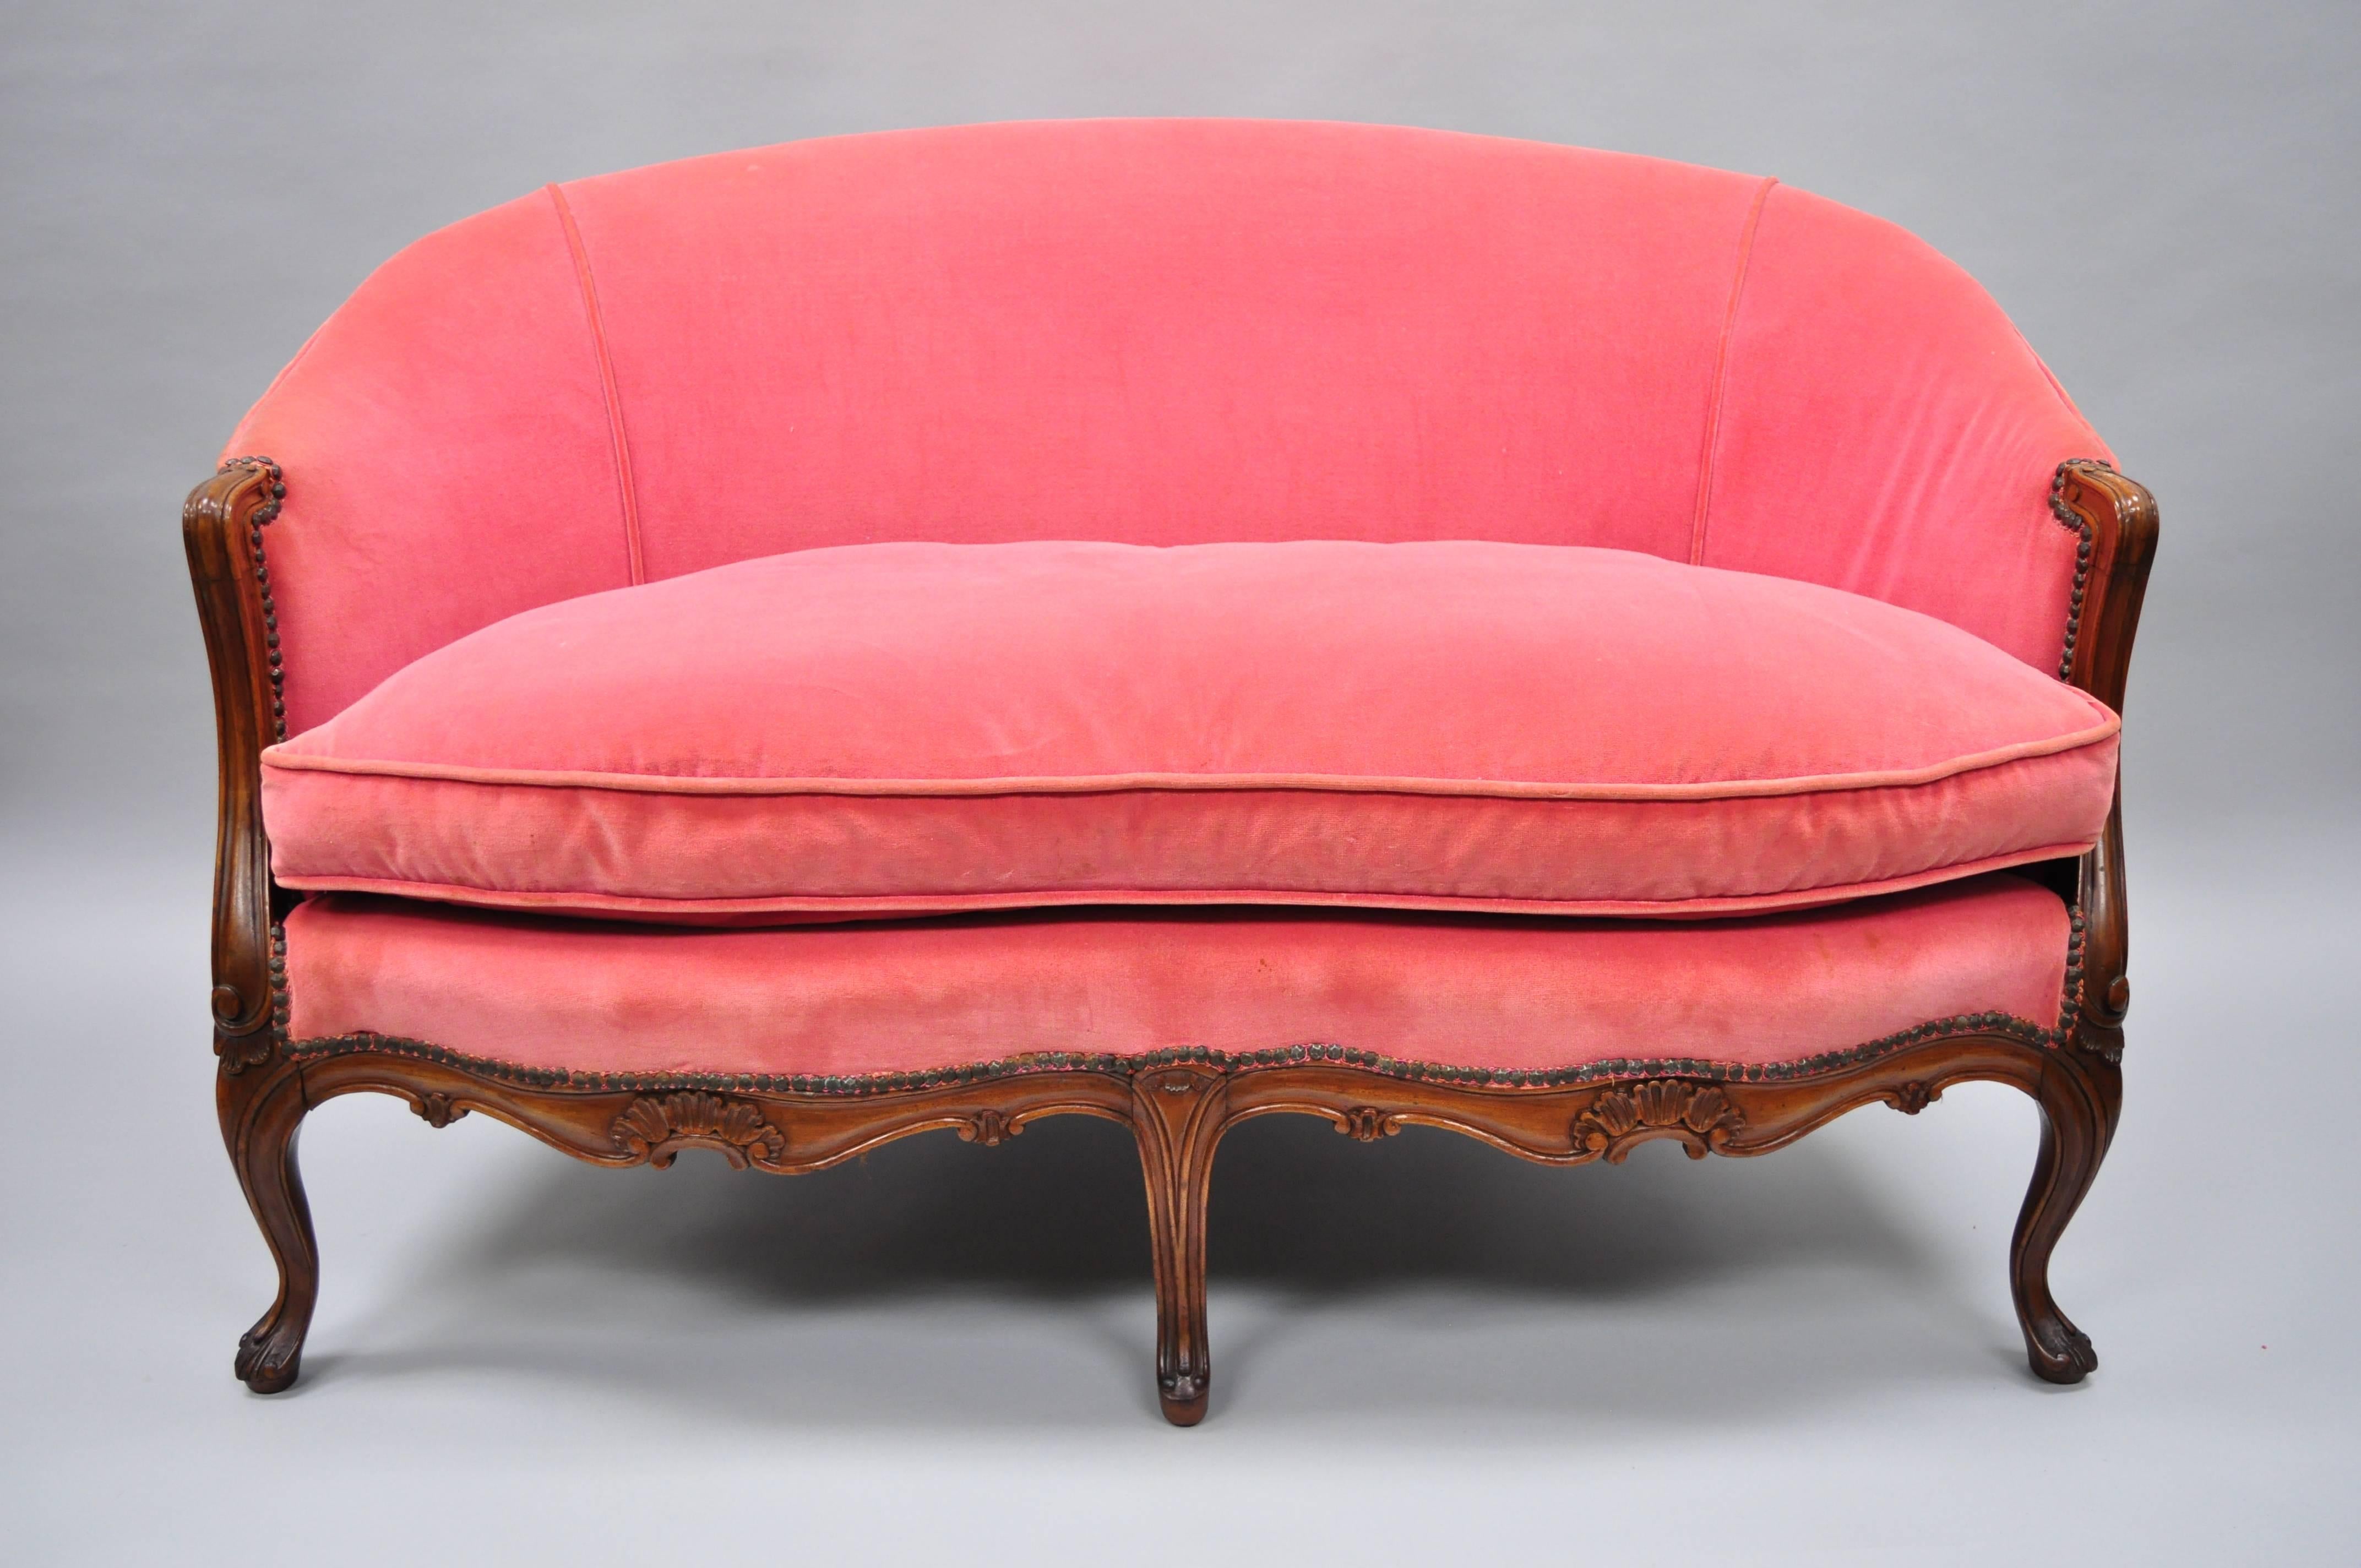 Antique French Louis XV style carved walnut settee. Features shapely oval frame, partial down filled cushion, solid wood construction, nicely carved details, cabriole legs, great style and form, circa 1920s. Measurements: 32.5